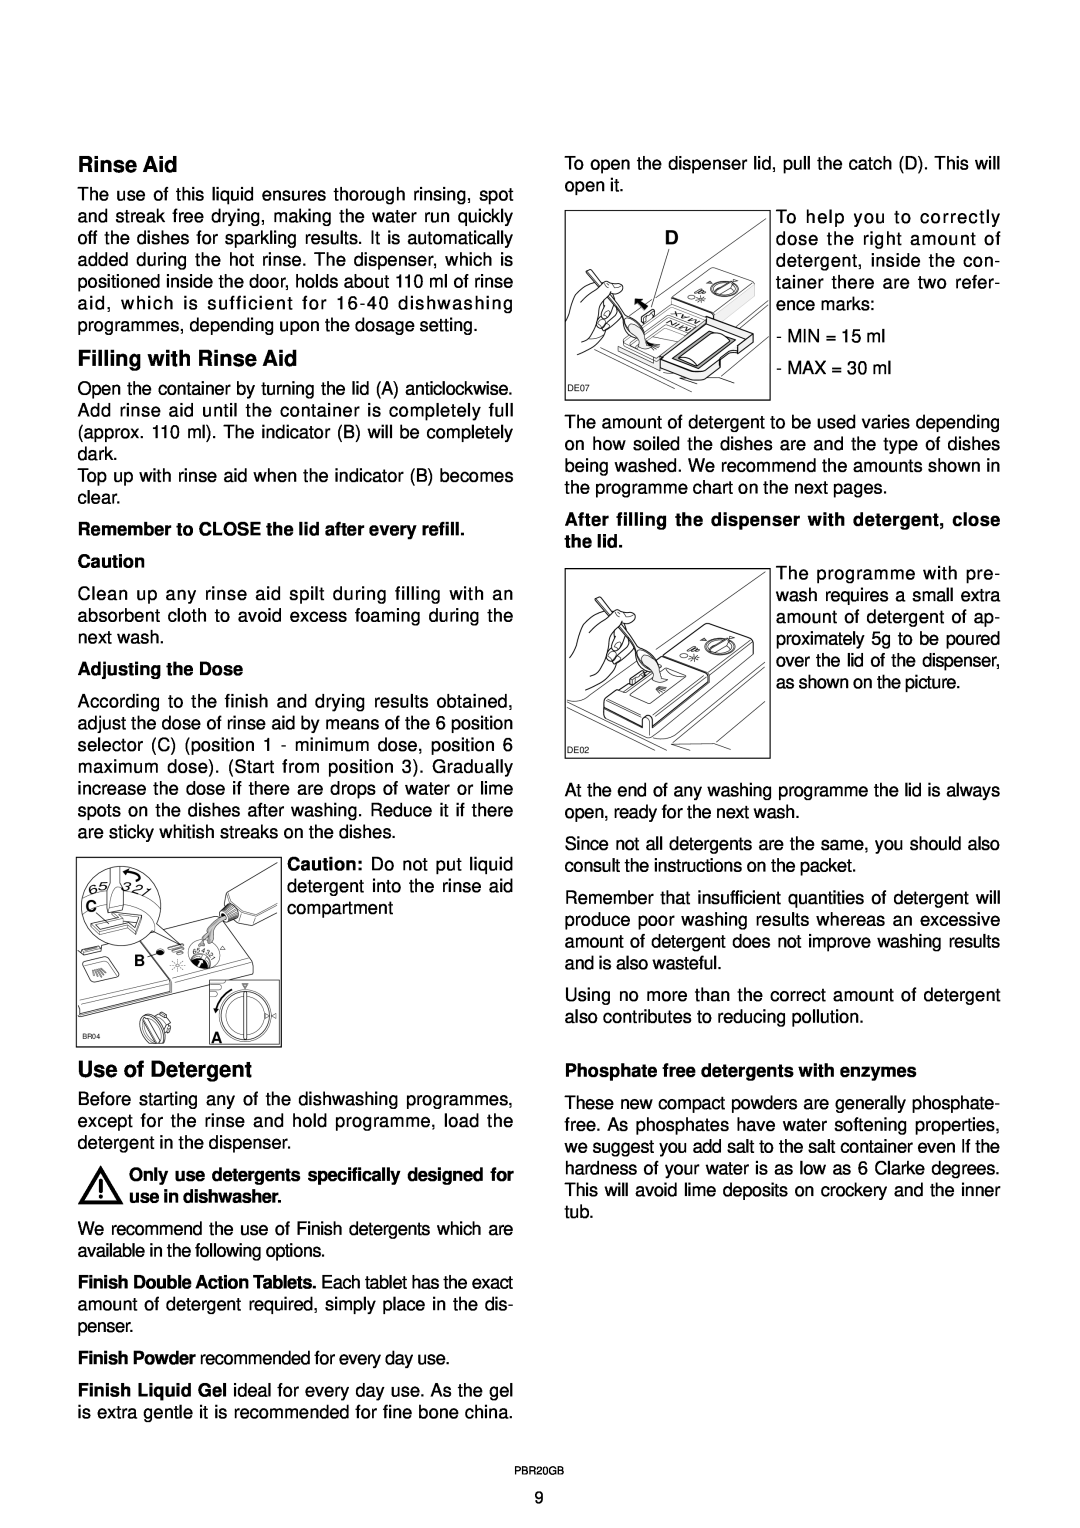 Zanussi DW 911 manual Filling with Rinse Aid, Use of Detergent 